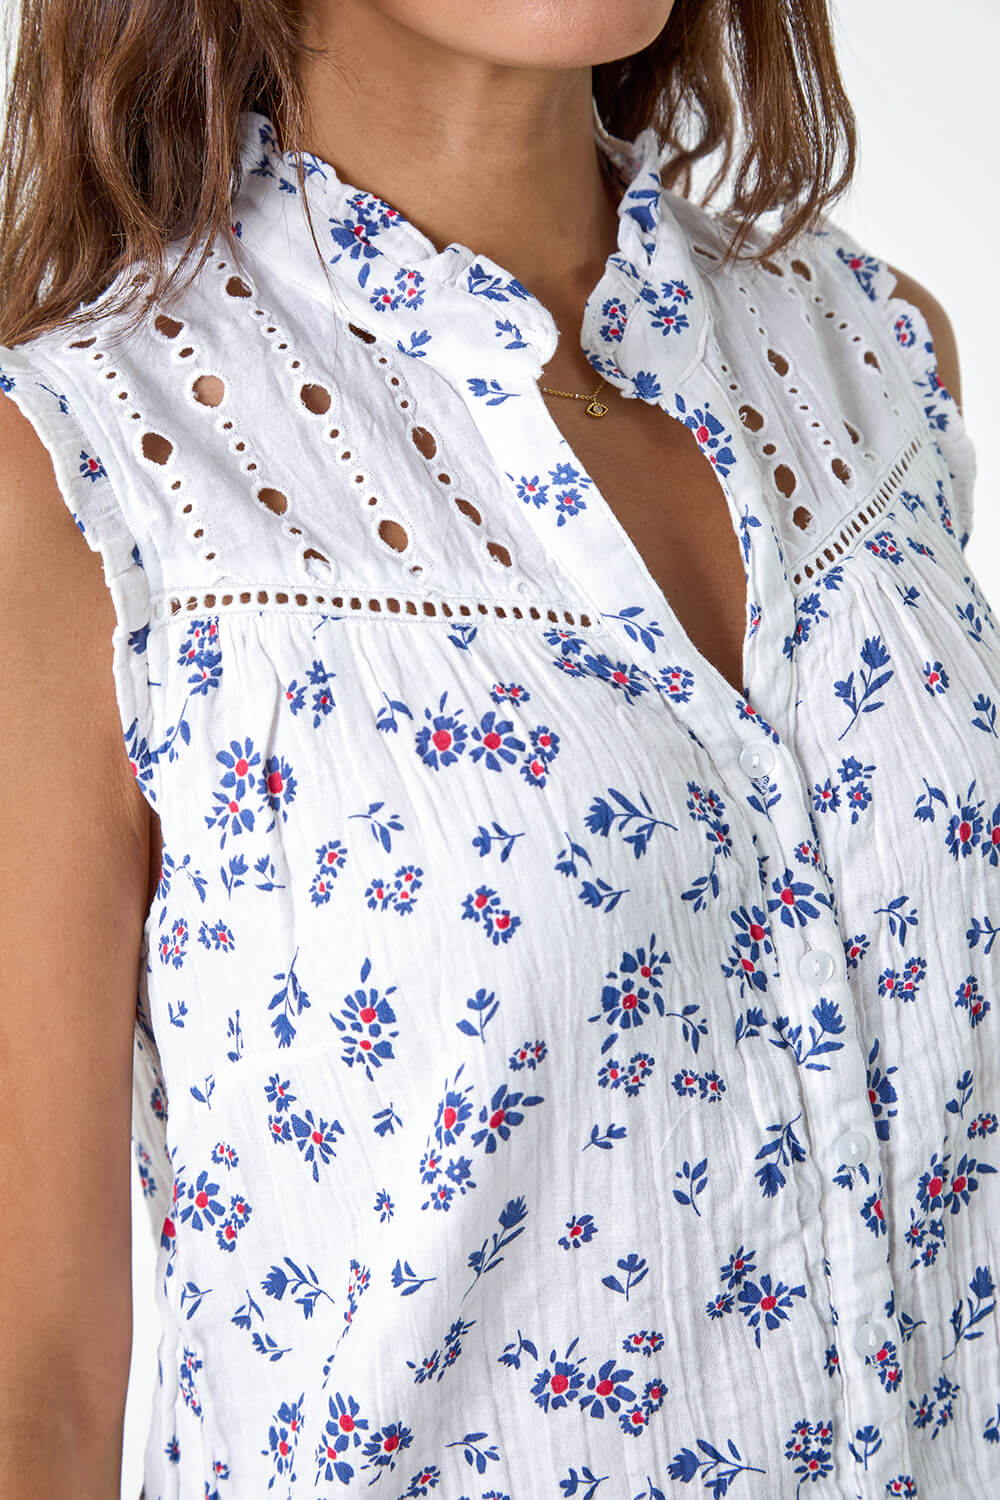 Blue Cotton Embroidered Floral Blouse, Image 5 of 5